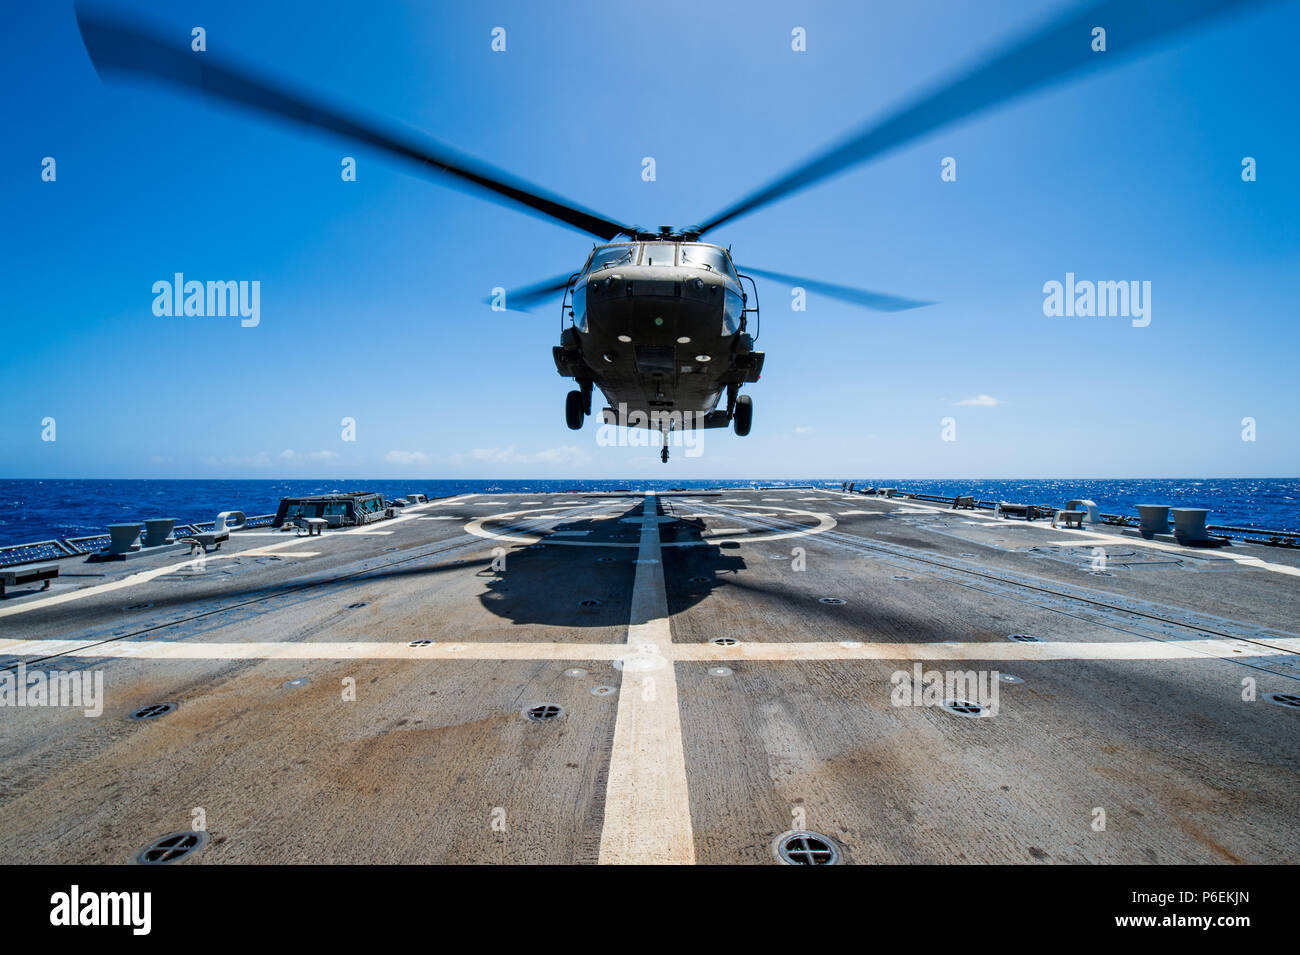 180627-N-LI768-1046 PACIFIC OCEAN (June 27, 2018) – A U.S. Army HH-60M Black Hawk conducts deck landing qualifications aboard the guided missile destroyer USS Dewey (DDG 105). Dewey is underway in the U.S. 3rd Fleet area of operations. (U.S. Navy photo by Mass Communication Specialist 2nd Class Devin M. Langer/Released) Stock Photo